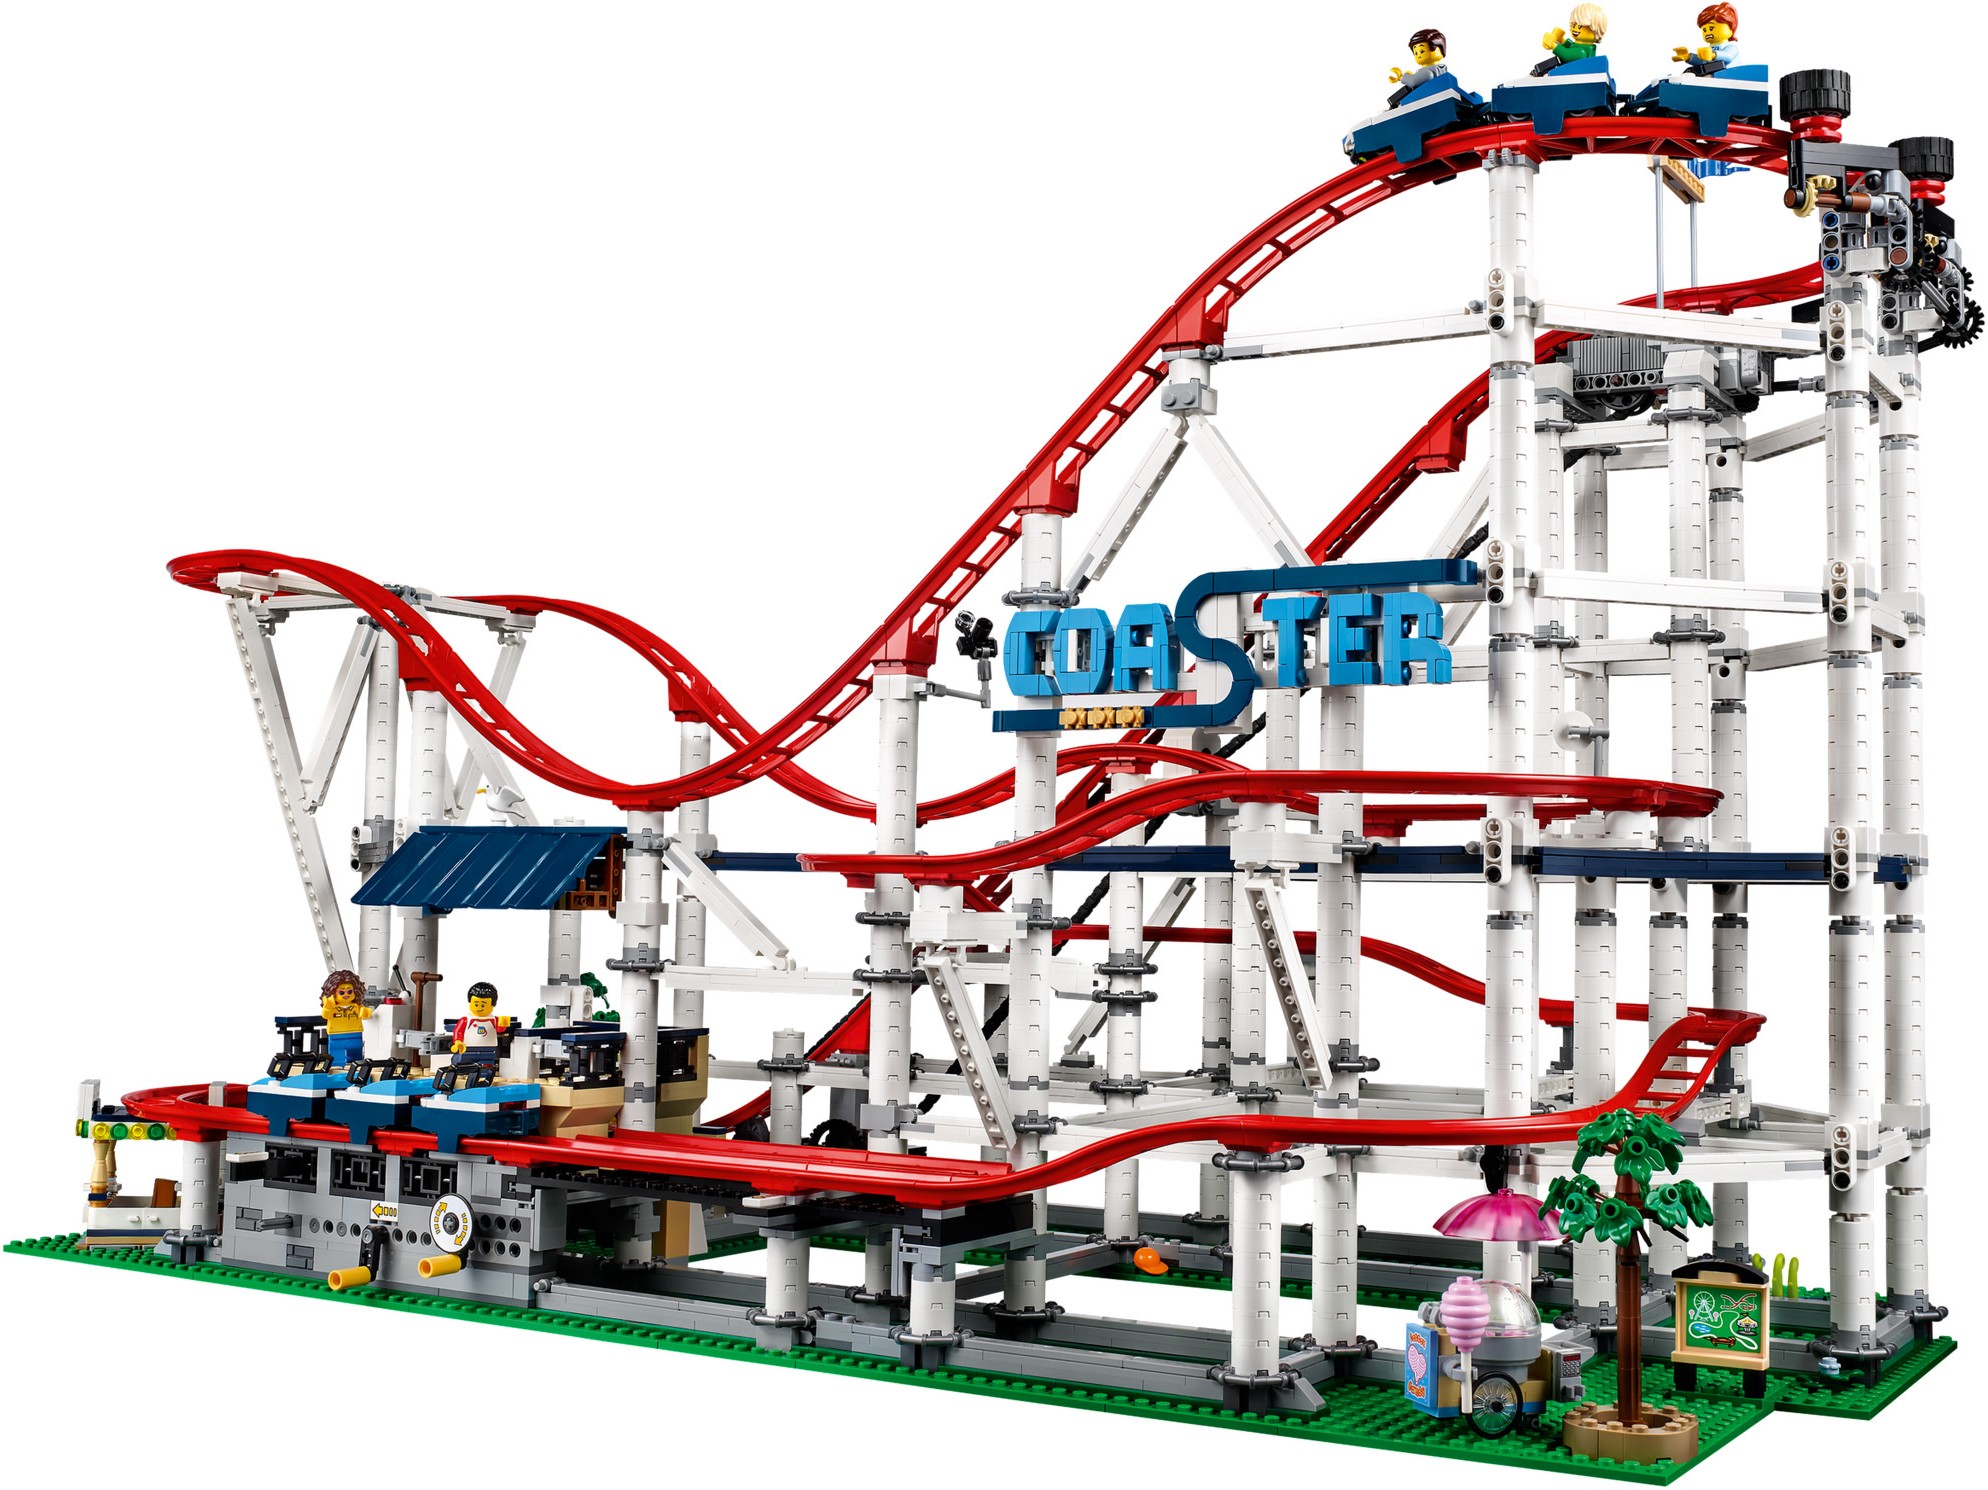 mynte aktivering diamant 10 Biggest LEGO Sets That Will Keep You Busy For Some Time